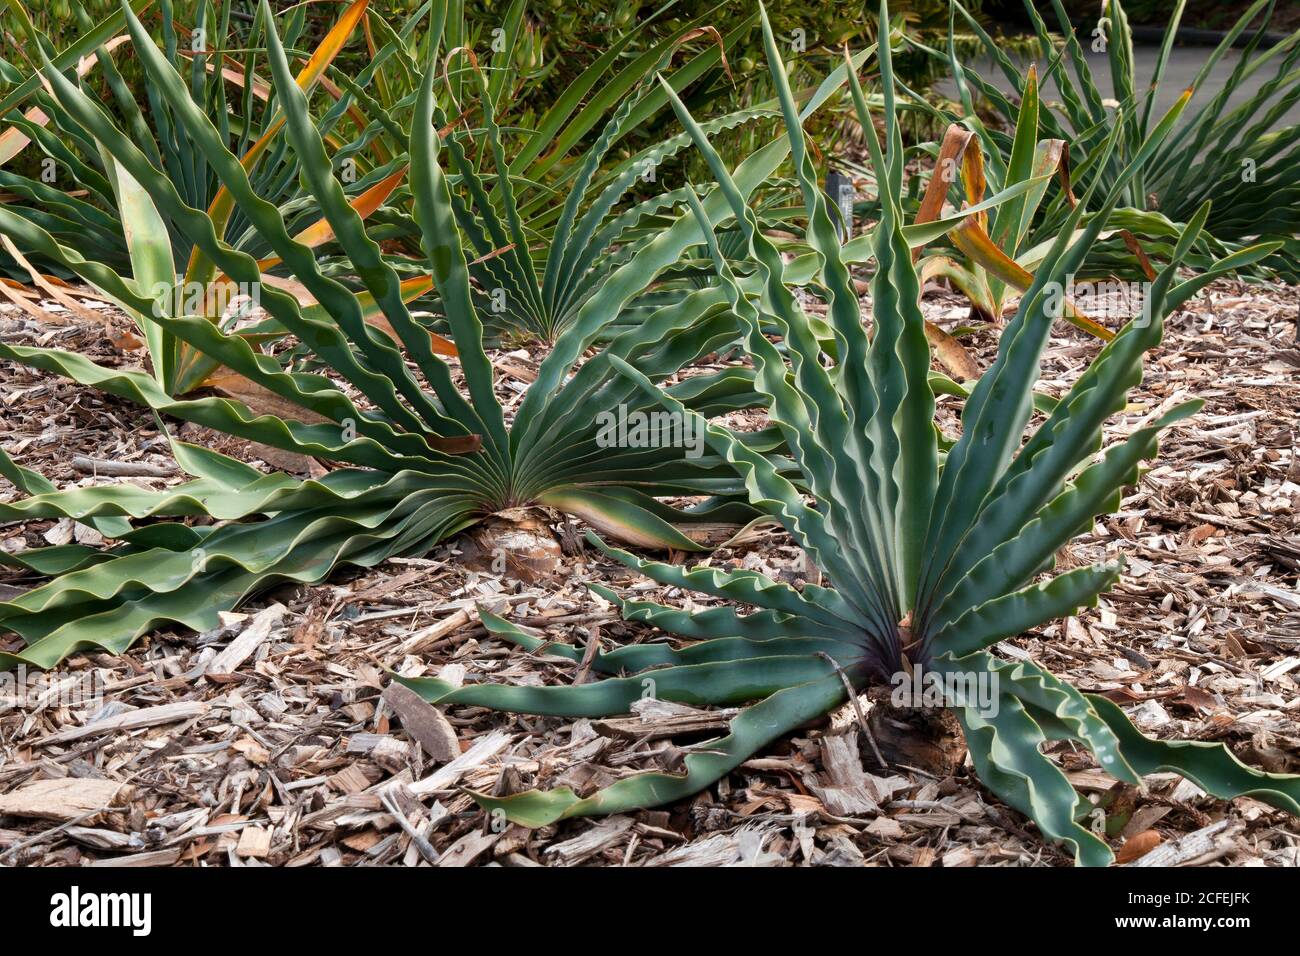 Sydney Australia,  garden bed of Boophone disticha or tumbleweed a fan shaped plant Stock Photo